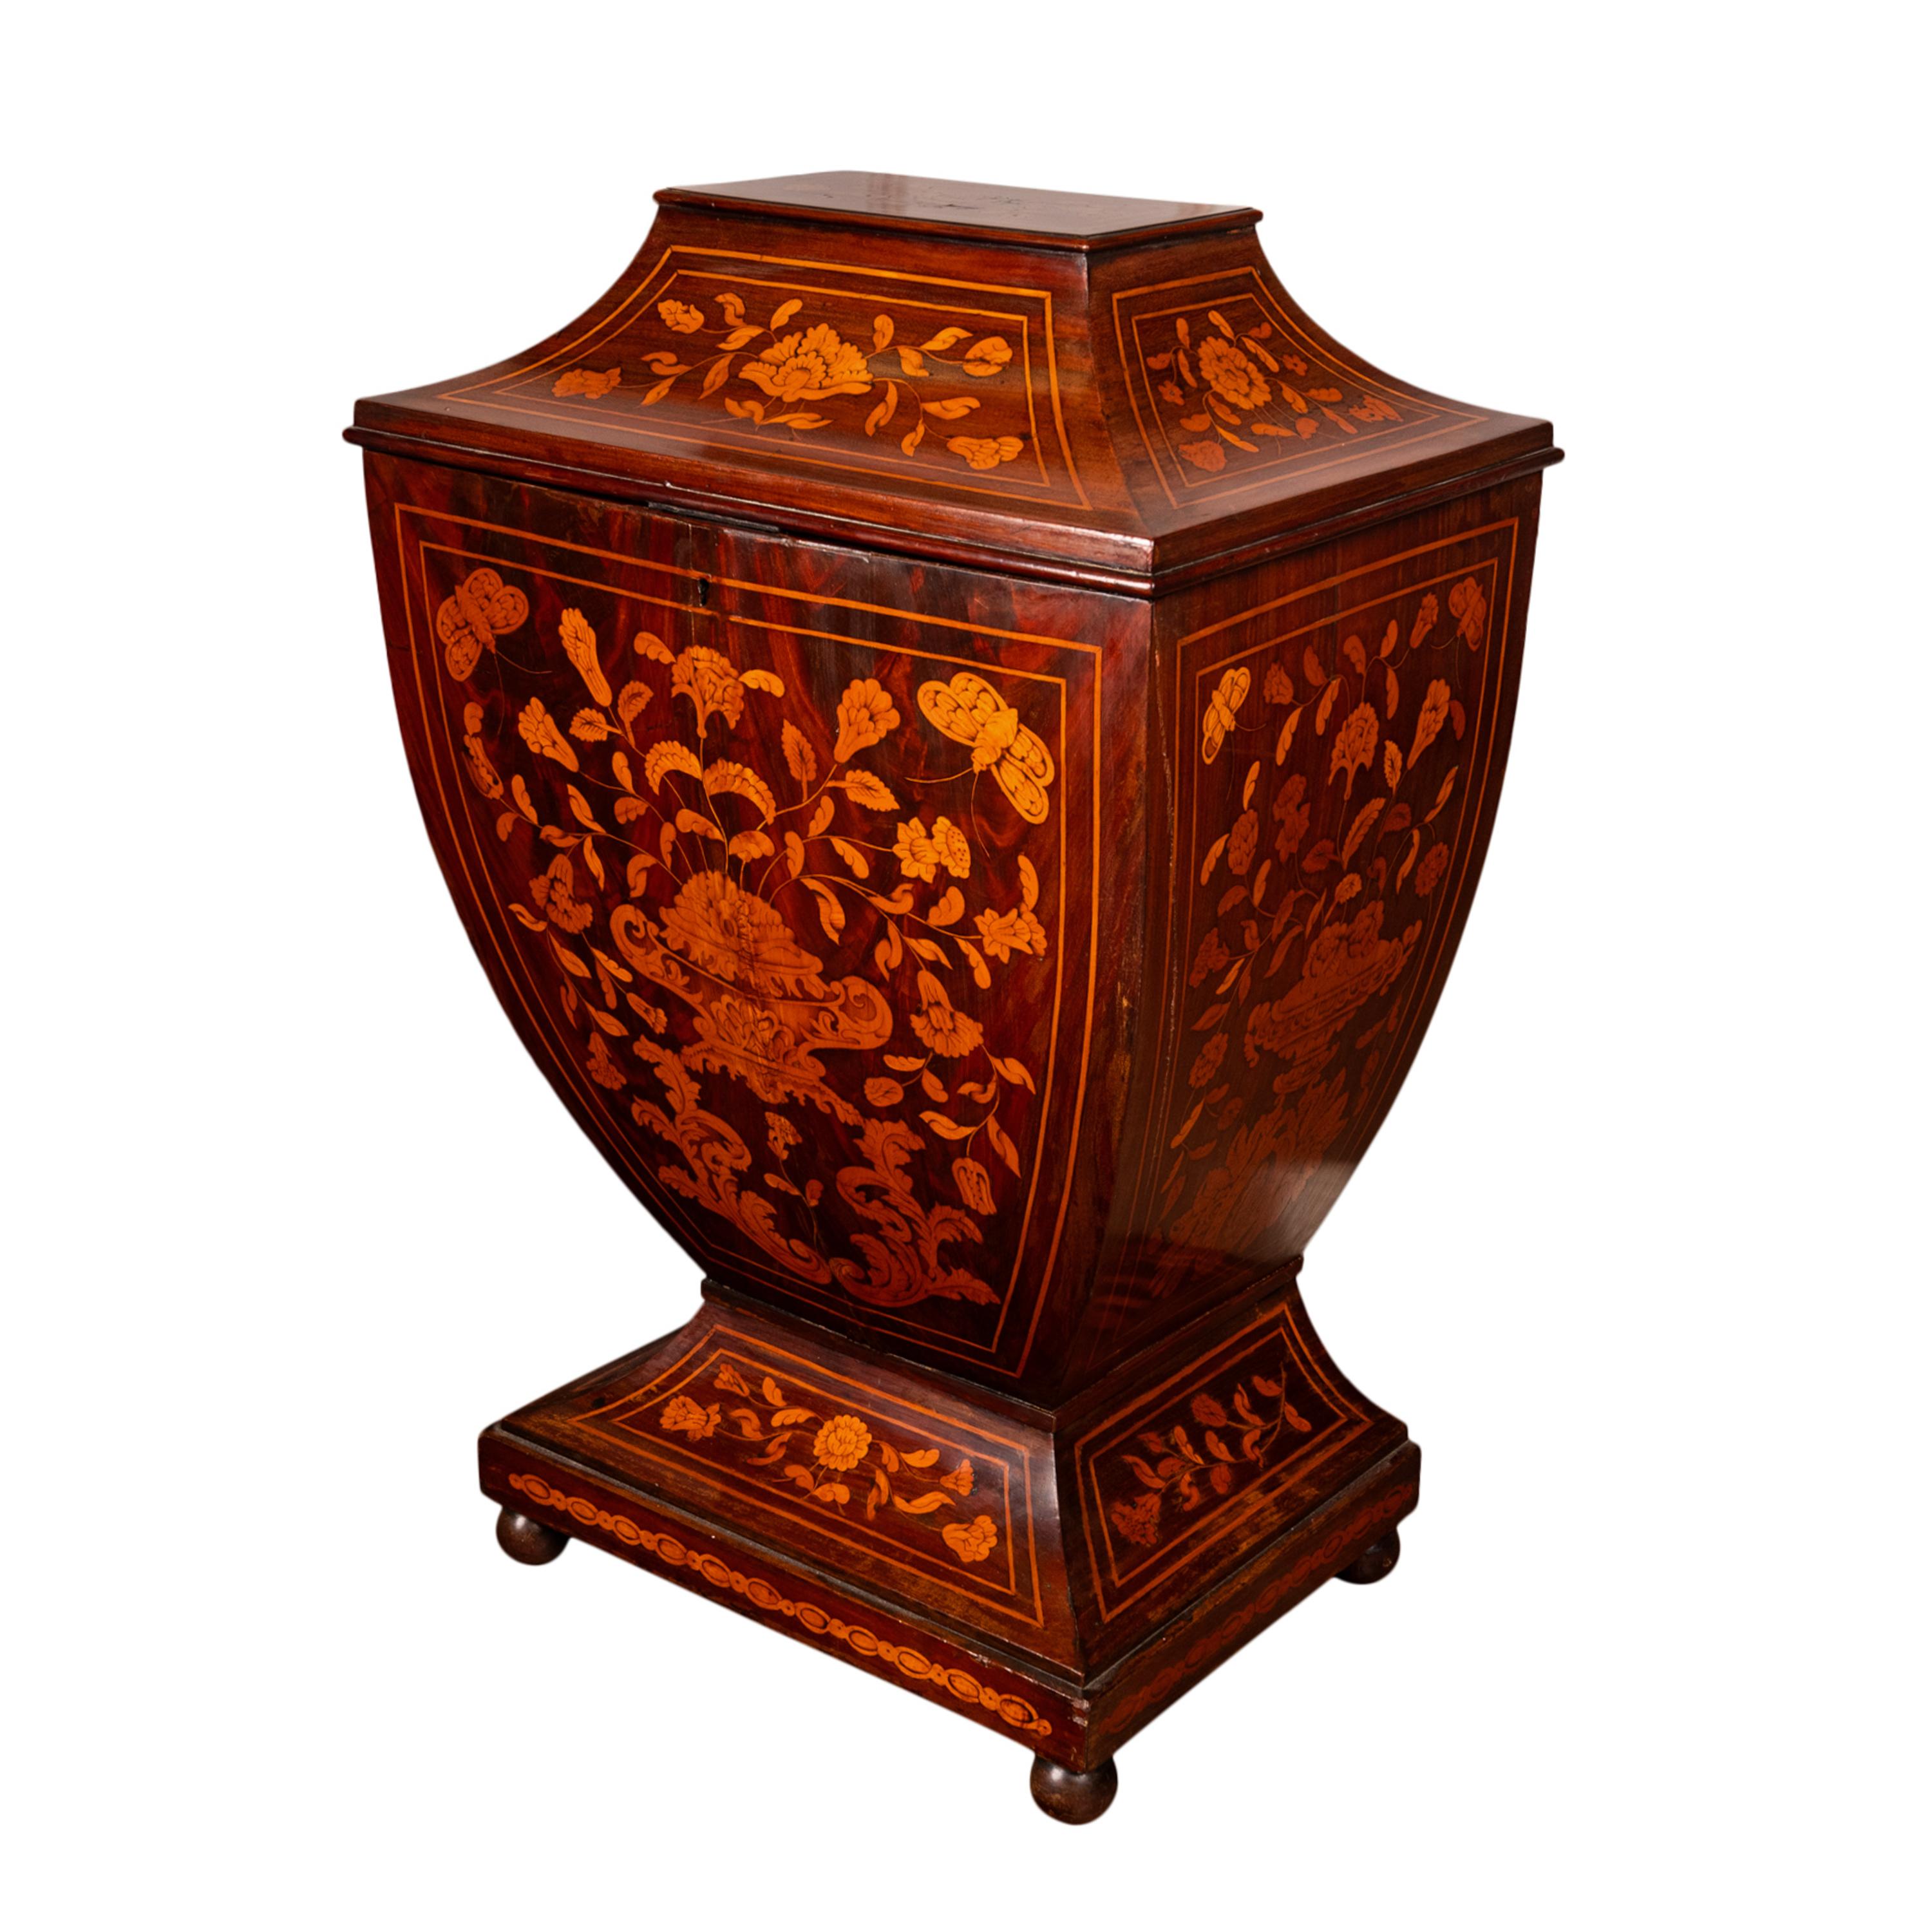 Rosewood Antique 18th Century Dutch Marquetry Bombe Shaped Wine Cellerette Cooler 1760 For Sale